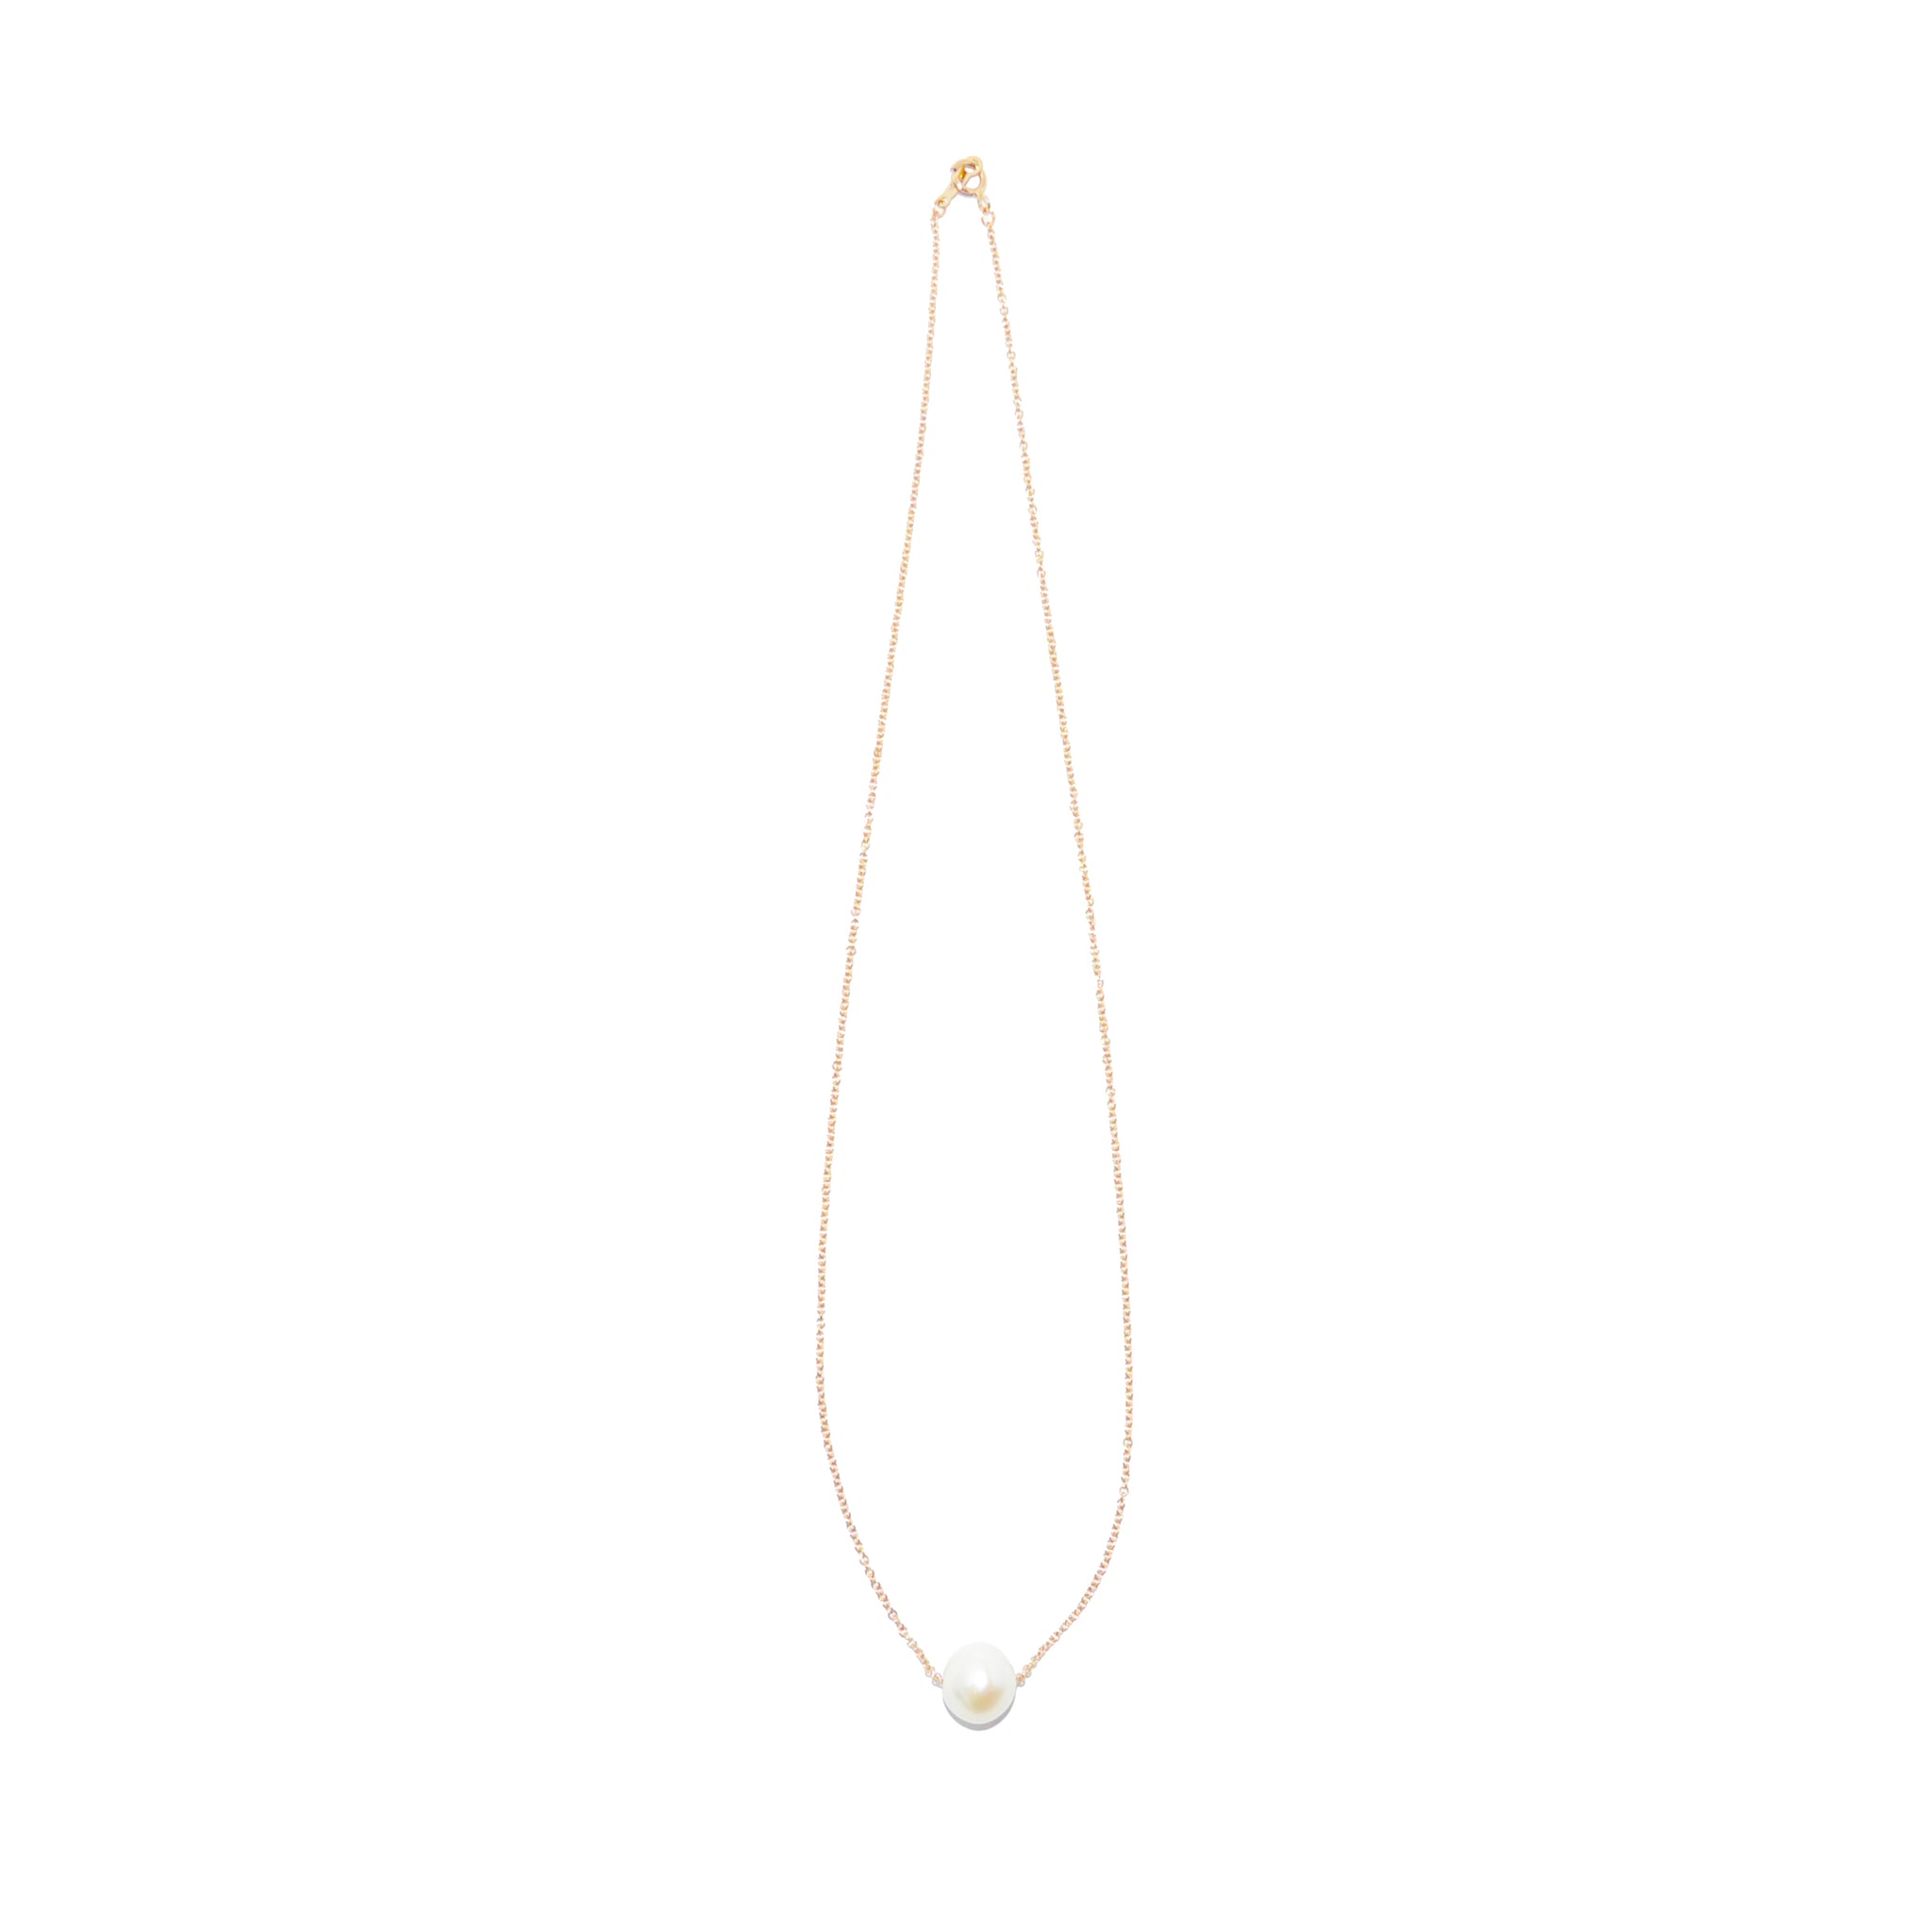 10mm Single Pearl Necklace (40cm)